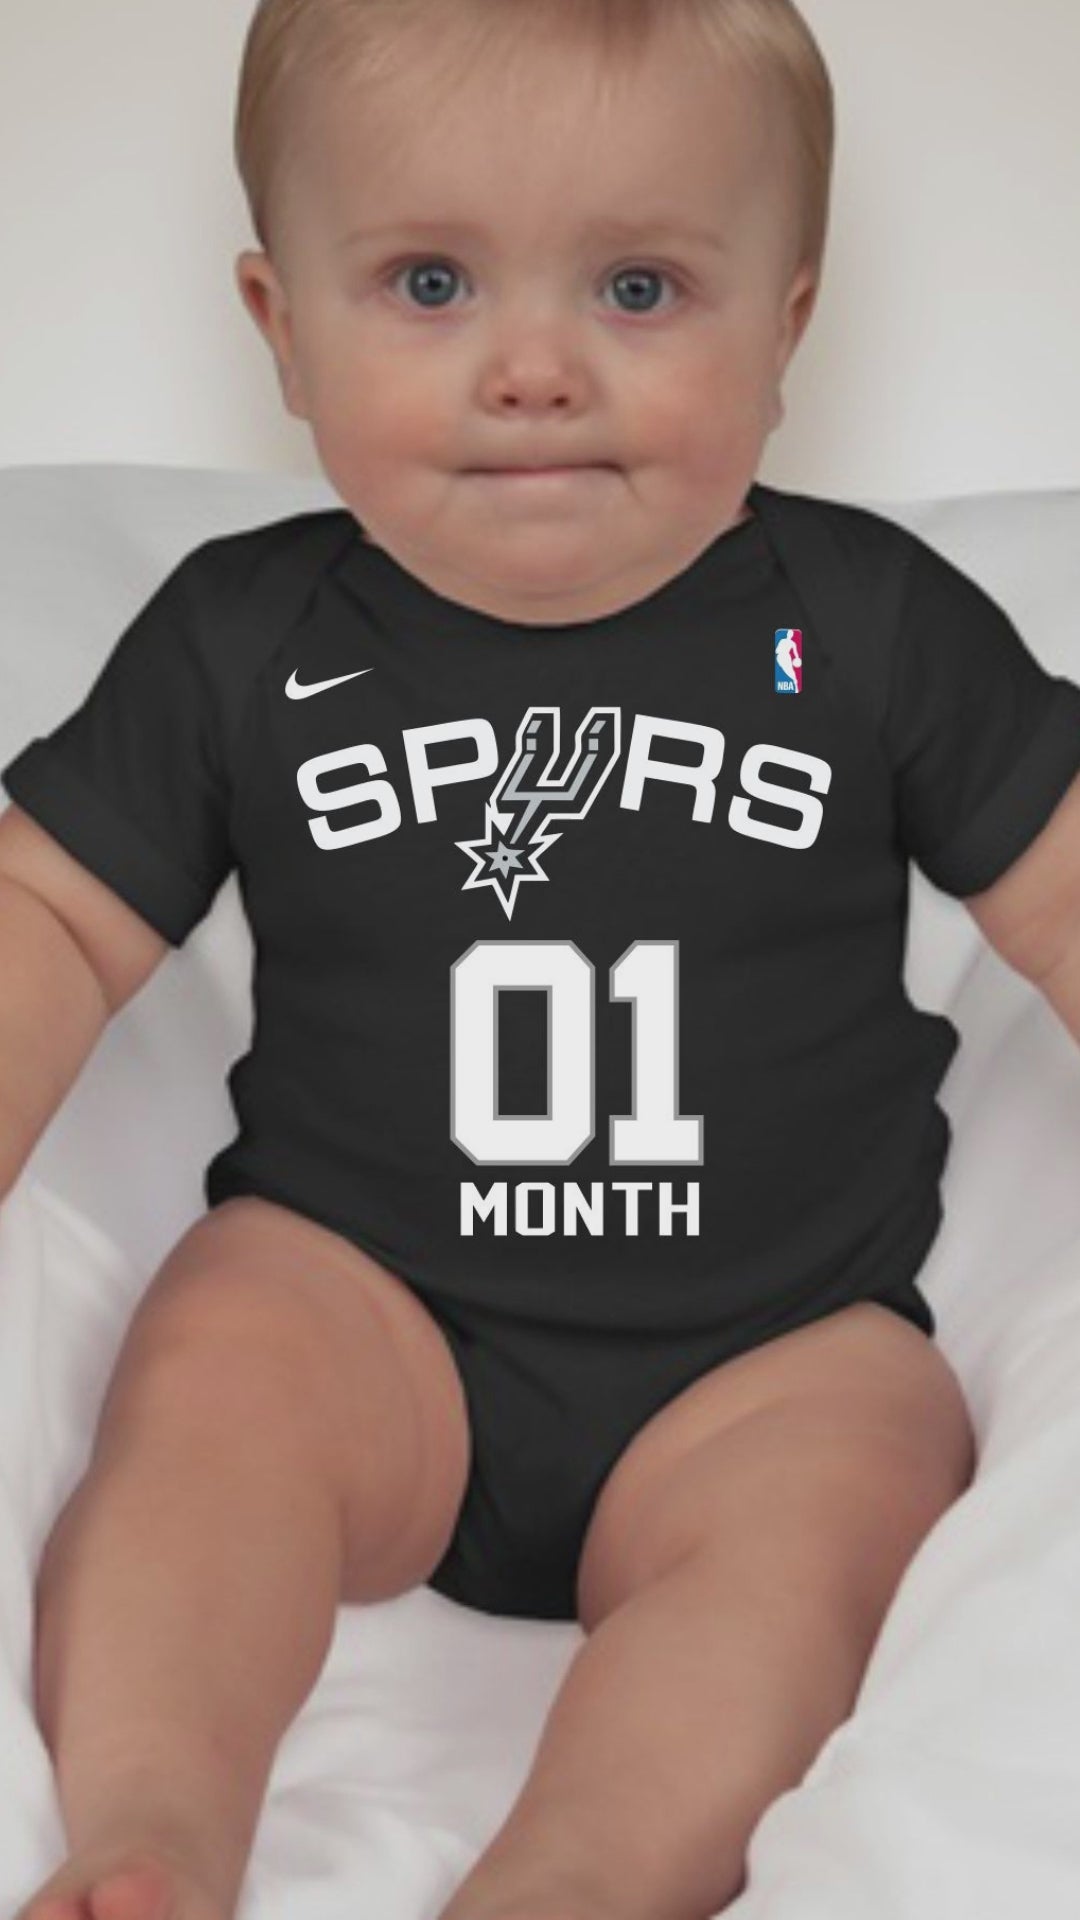  San Antonio Spurs Custom Baby Onesie - Personalized Baby Name  Embroidery & Official NBA Team Logo, Envelope Neck, Cotton,  Double-Stitched, Supersoft, Cozy, NBA Baby Bodysuit (Black, 0-3 months):  Clothing, Shoes 